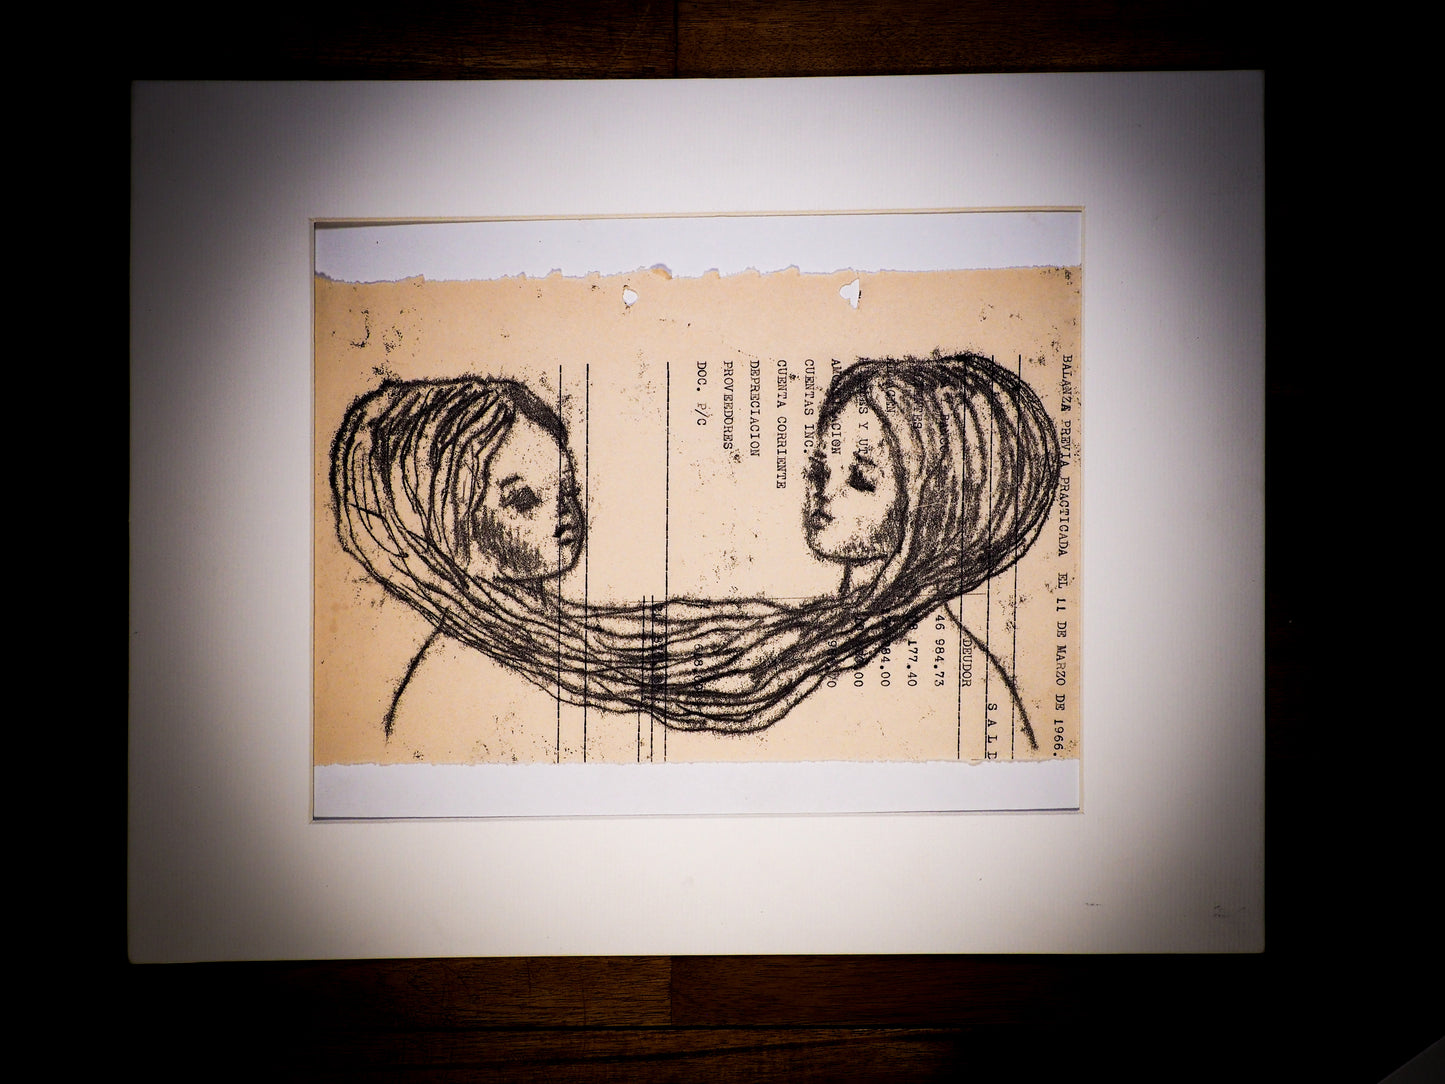 An original watercolor painting by Idania Salcido, the artist behind Danita Art.  This is a beautiful monoprint, a one of a kind ink and vintage paper original art creation depicting two girls whose memories are tied by their hairs in a very surreal piece, painted on a mid 20th century ledger sheet with typewriter characters.